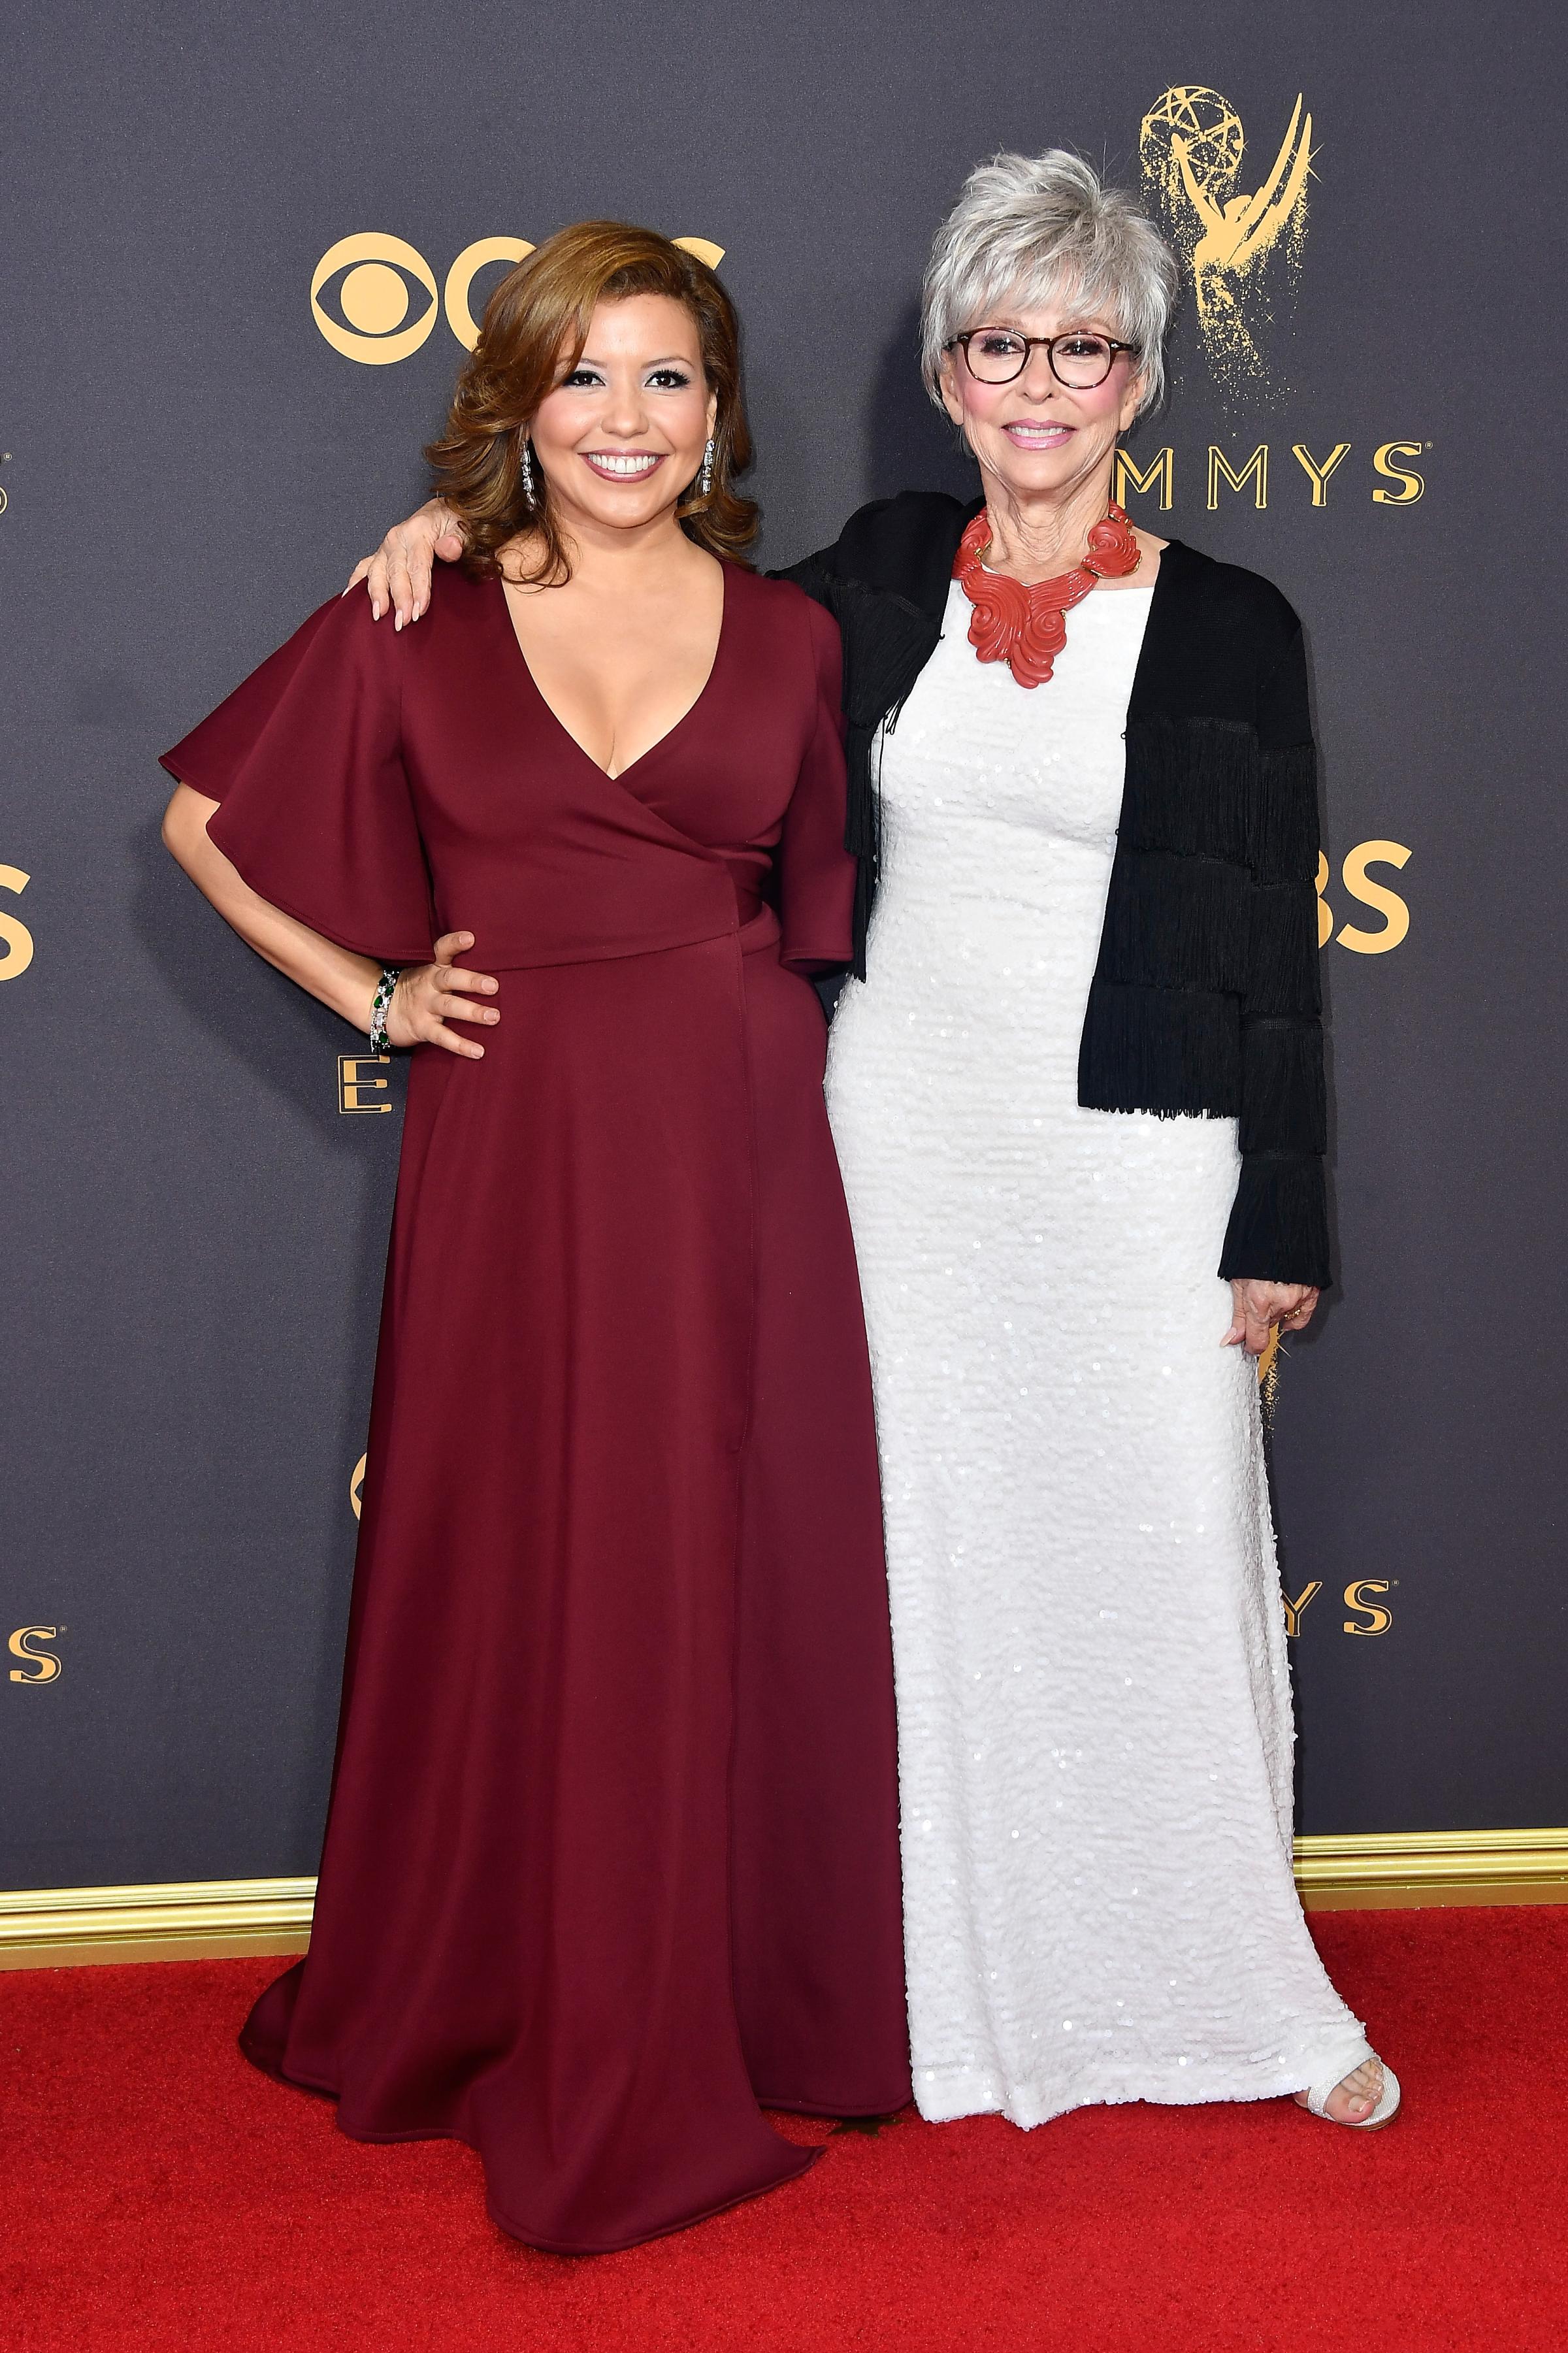 Actors Justina Machado and Rita Moreno attend the 69th Annual Primetime Emmy Awards at Microsoft Theater on Sept. 17, 2017 in Los Angeles.